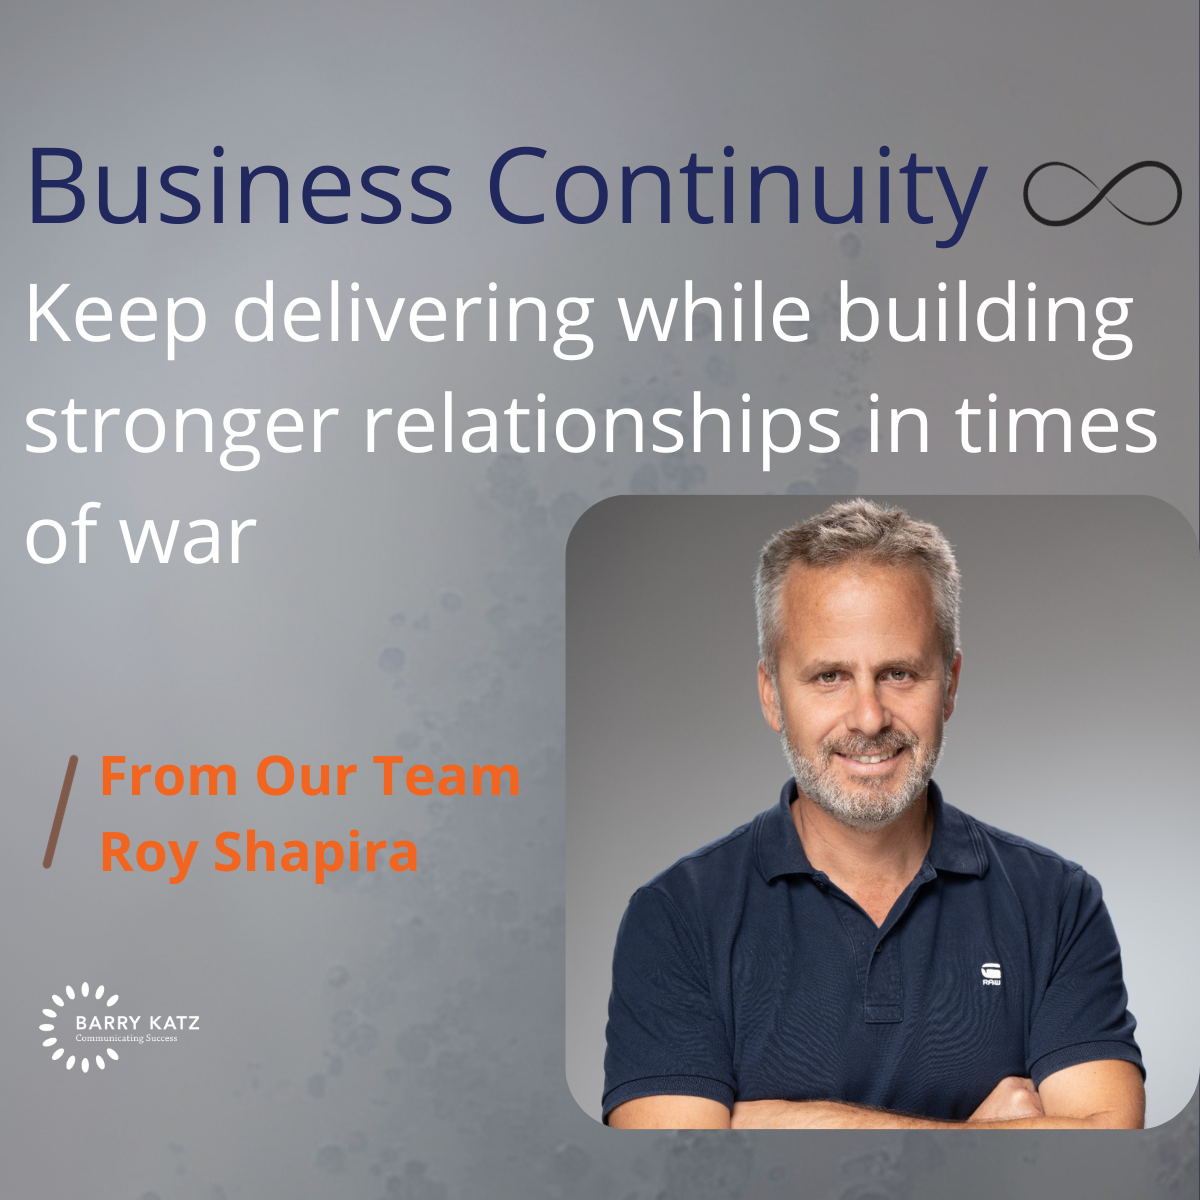 Business Continuity – Keep delivering while building stronger relationships in times of war